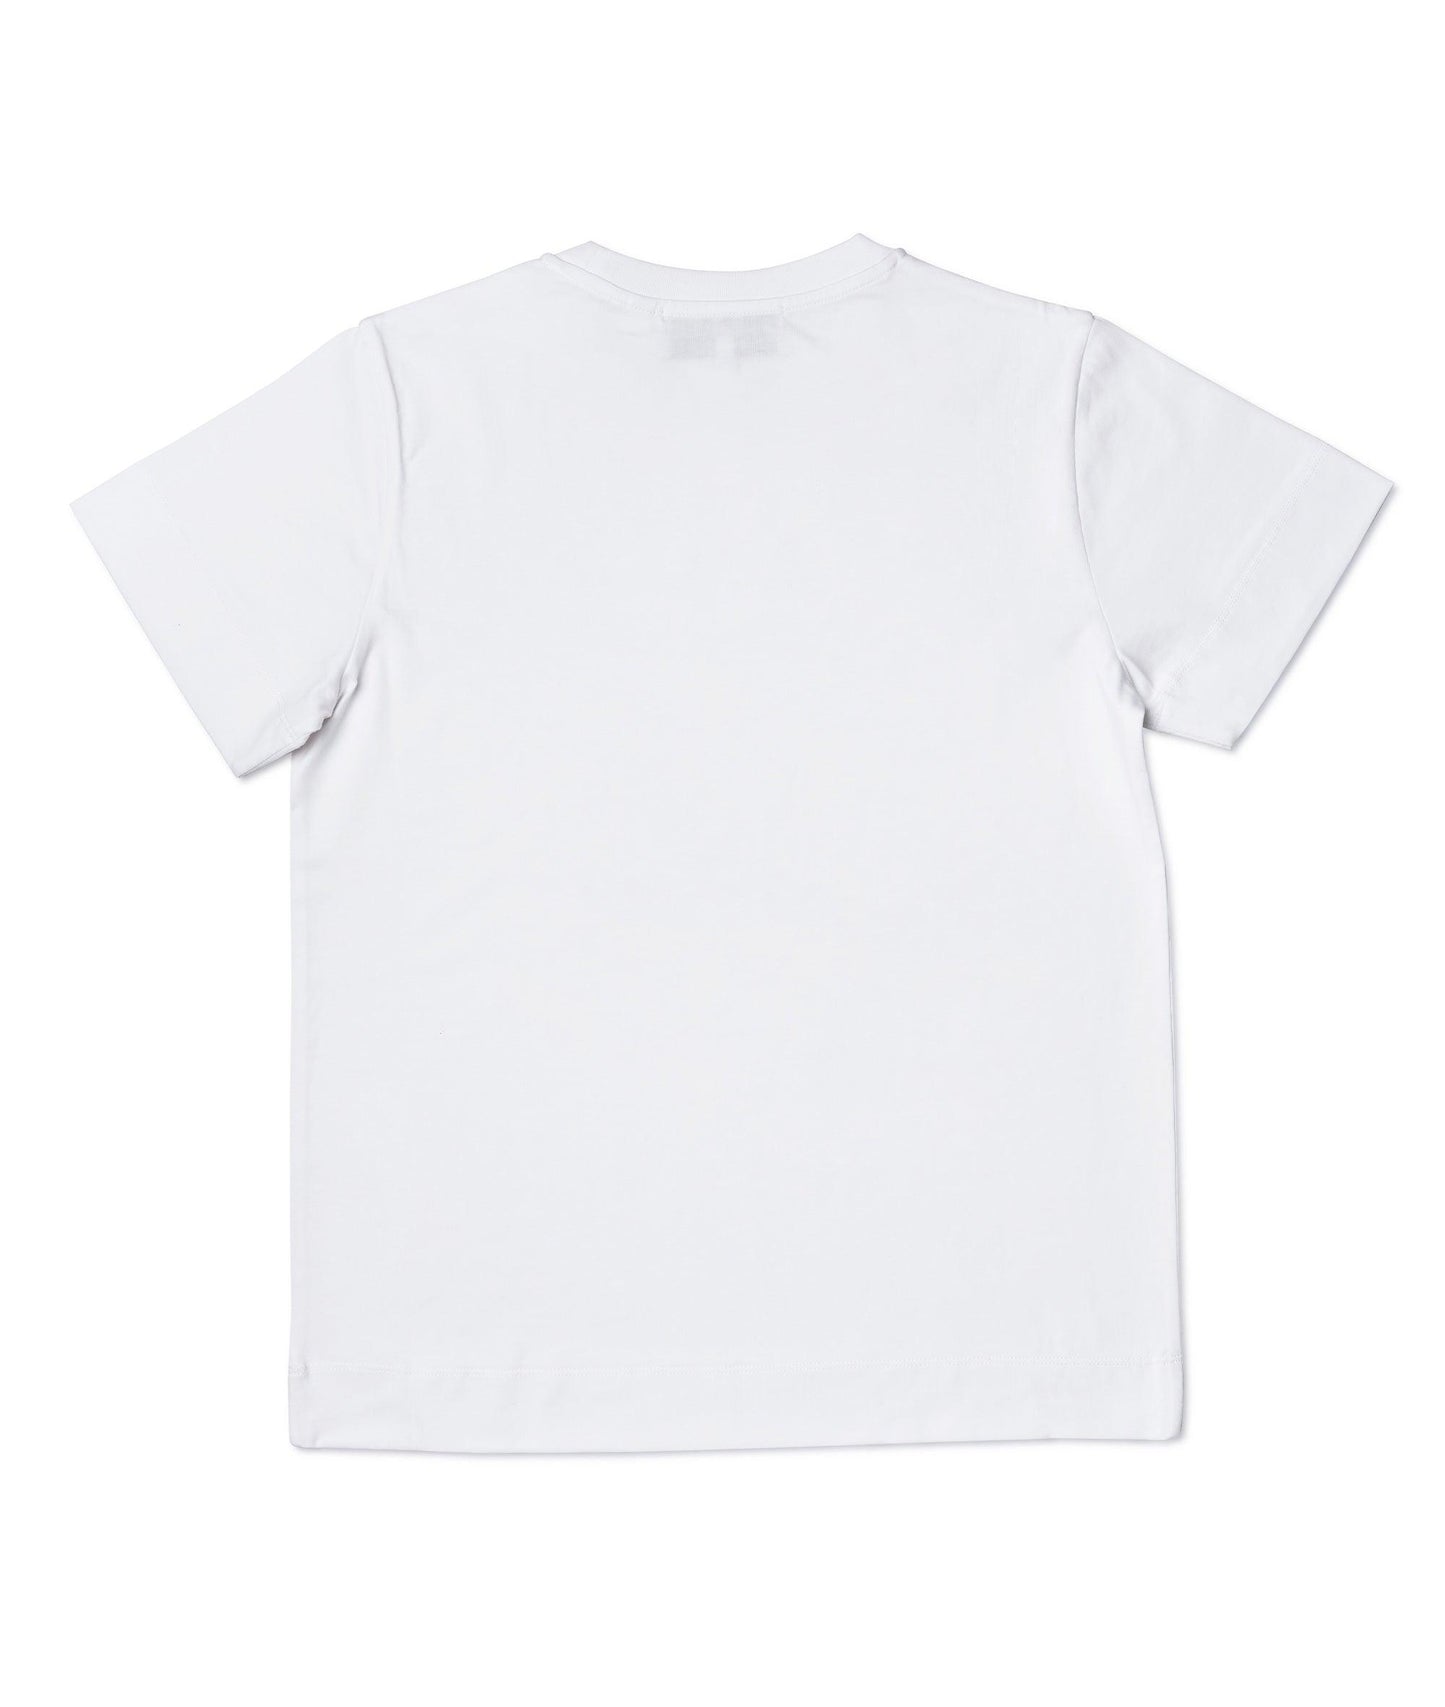 'I See You' White T-Shirt - Wing of Wisdom